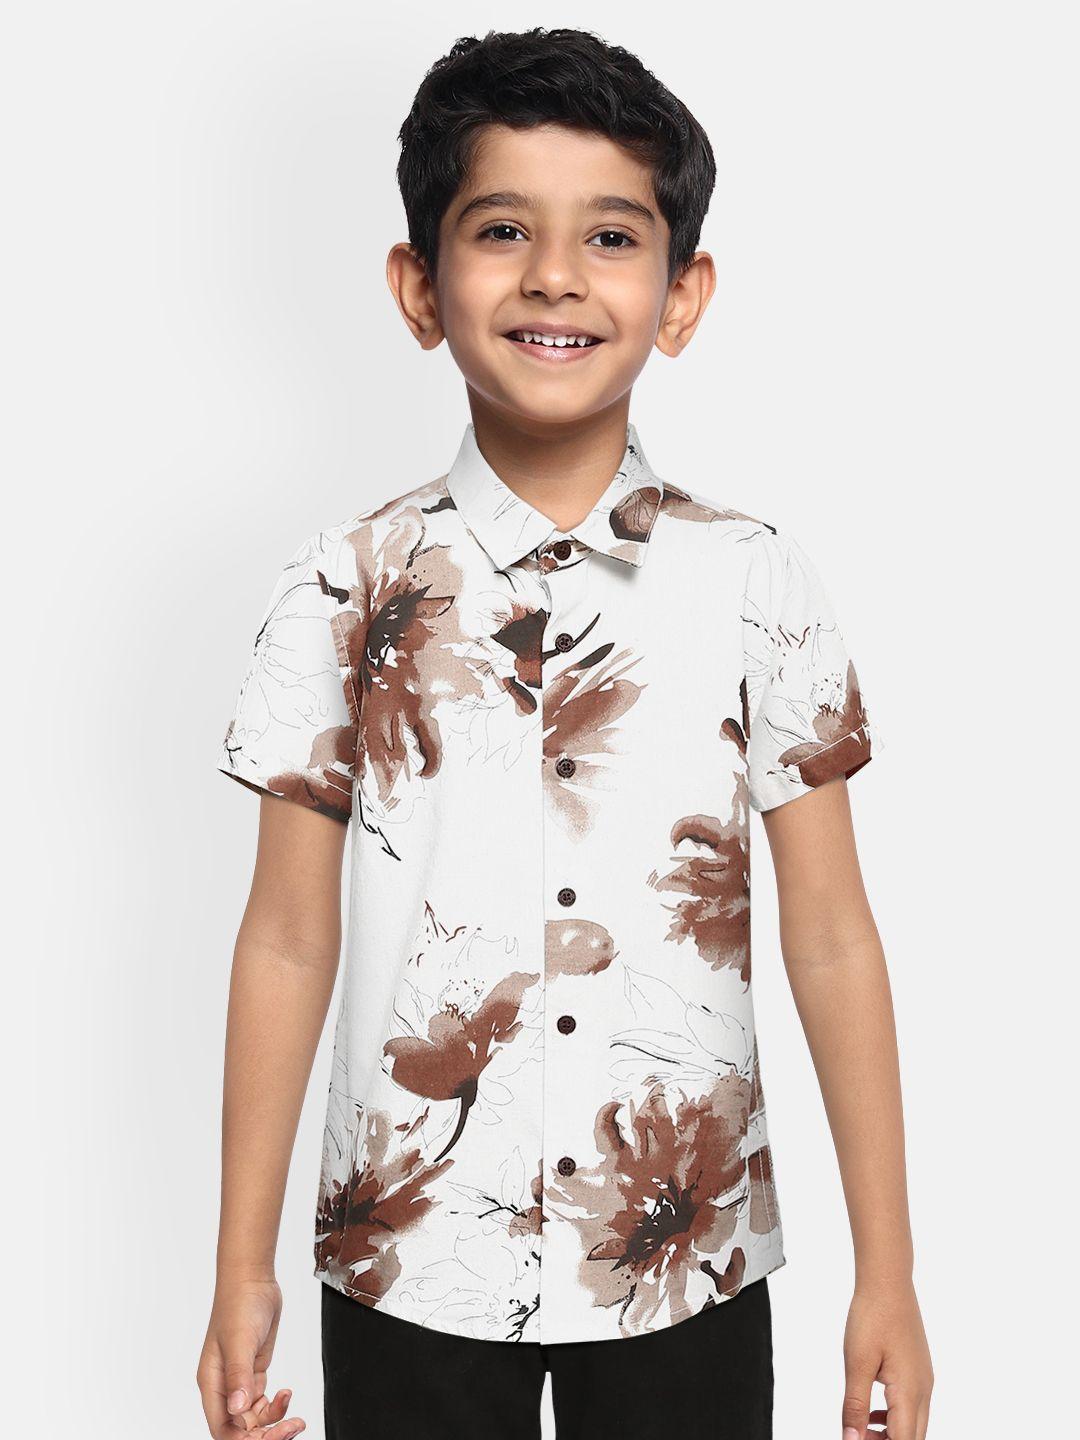 Bene Kleed Boys Off-White Slim Fit N9 Silver Anti-Microbial Cotton Printed Casual Shirt